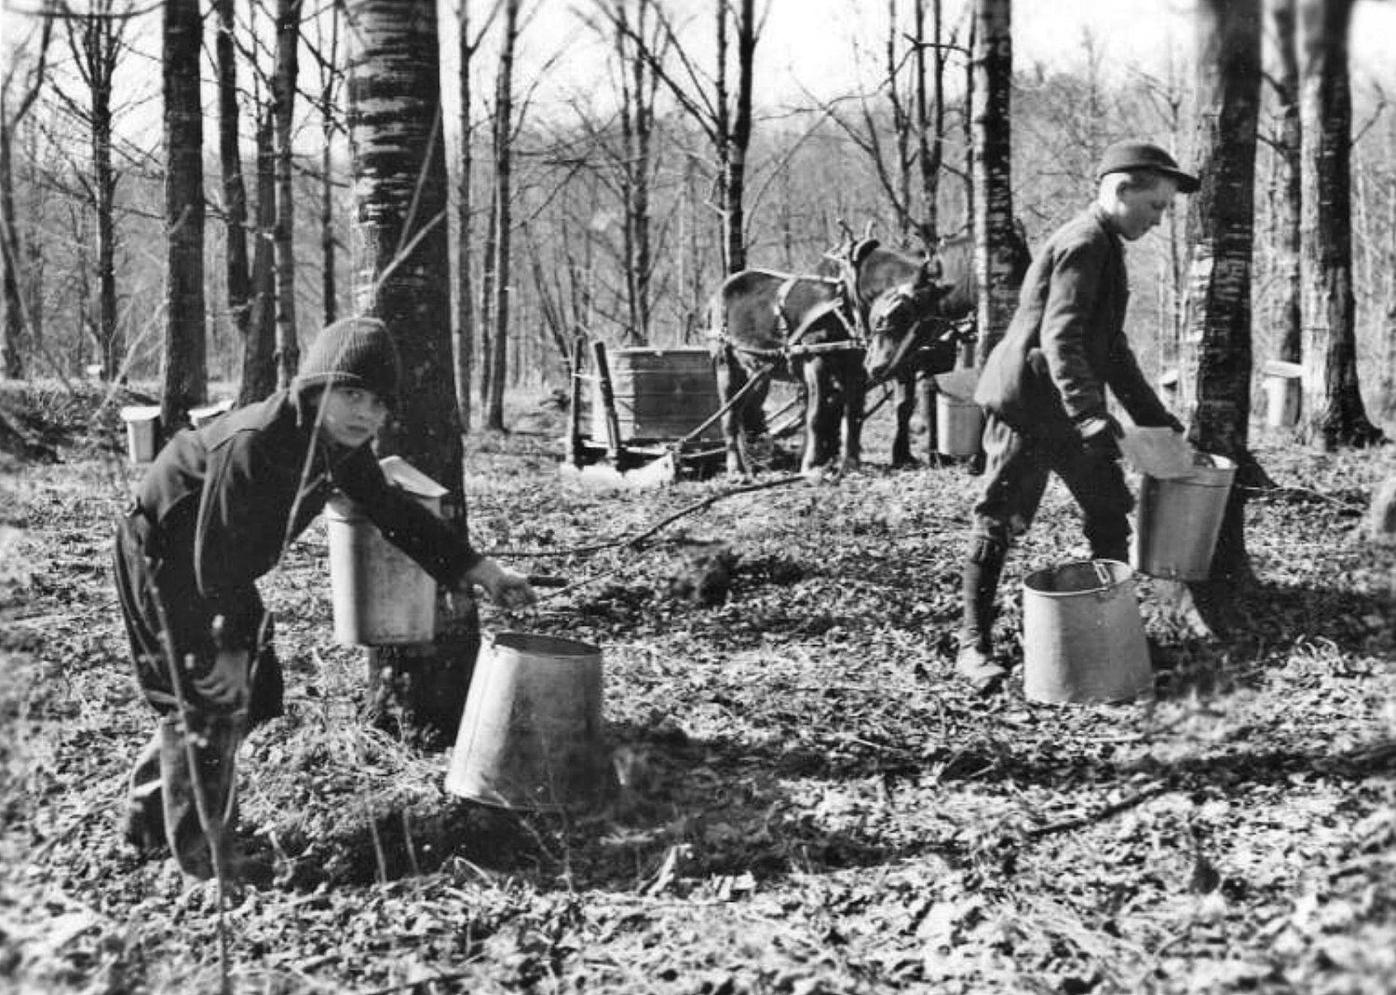 Methods change, but maple sap tradition continues